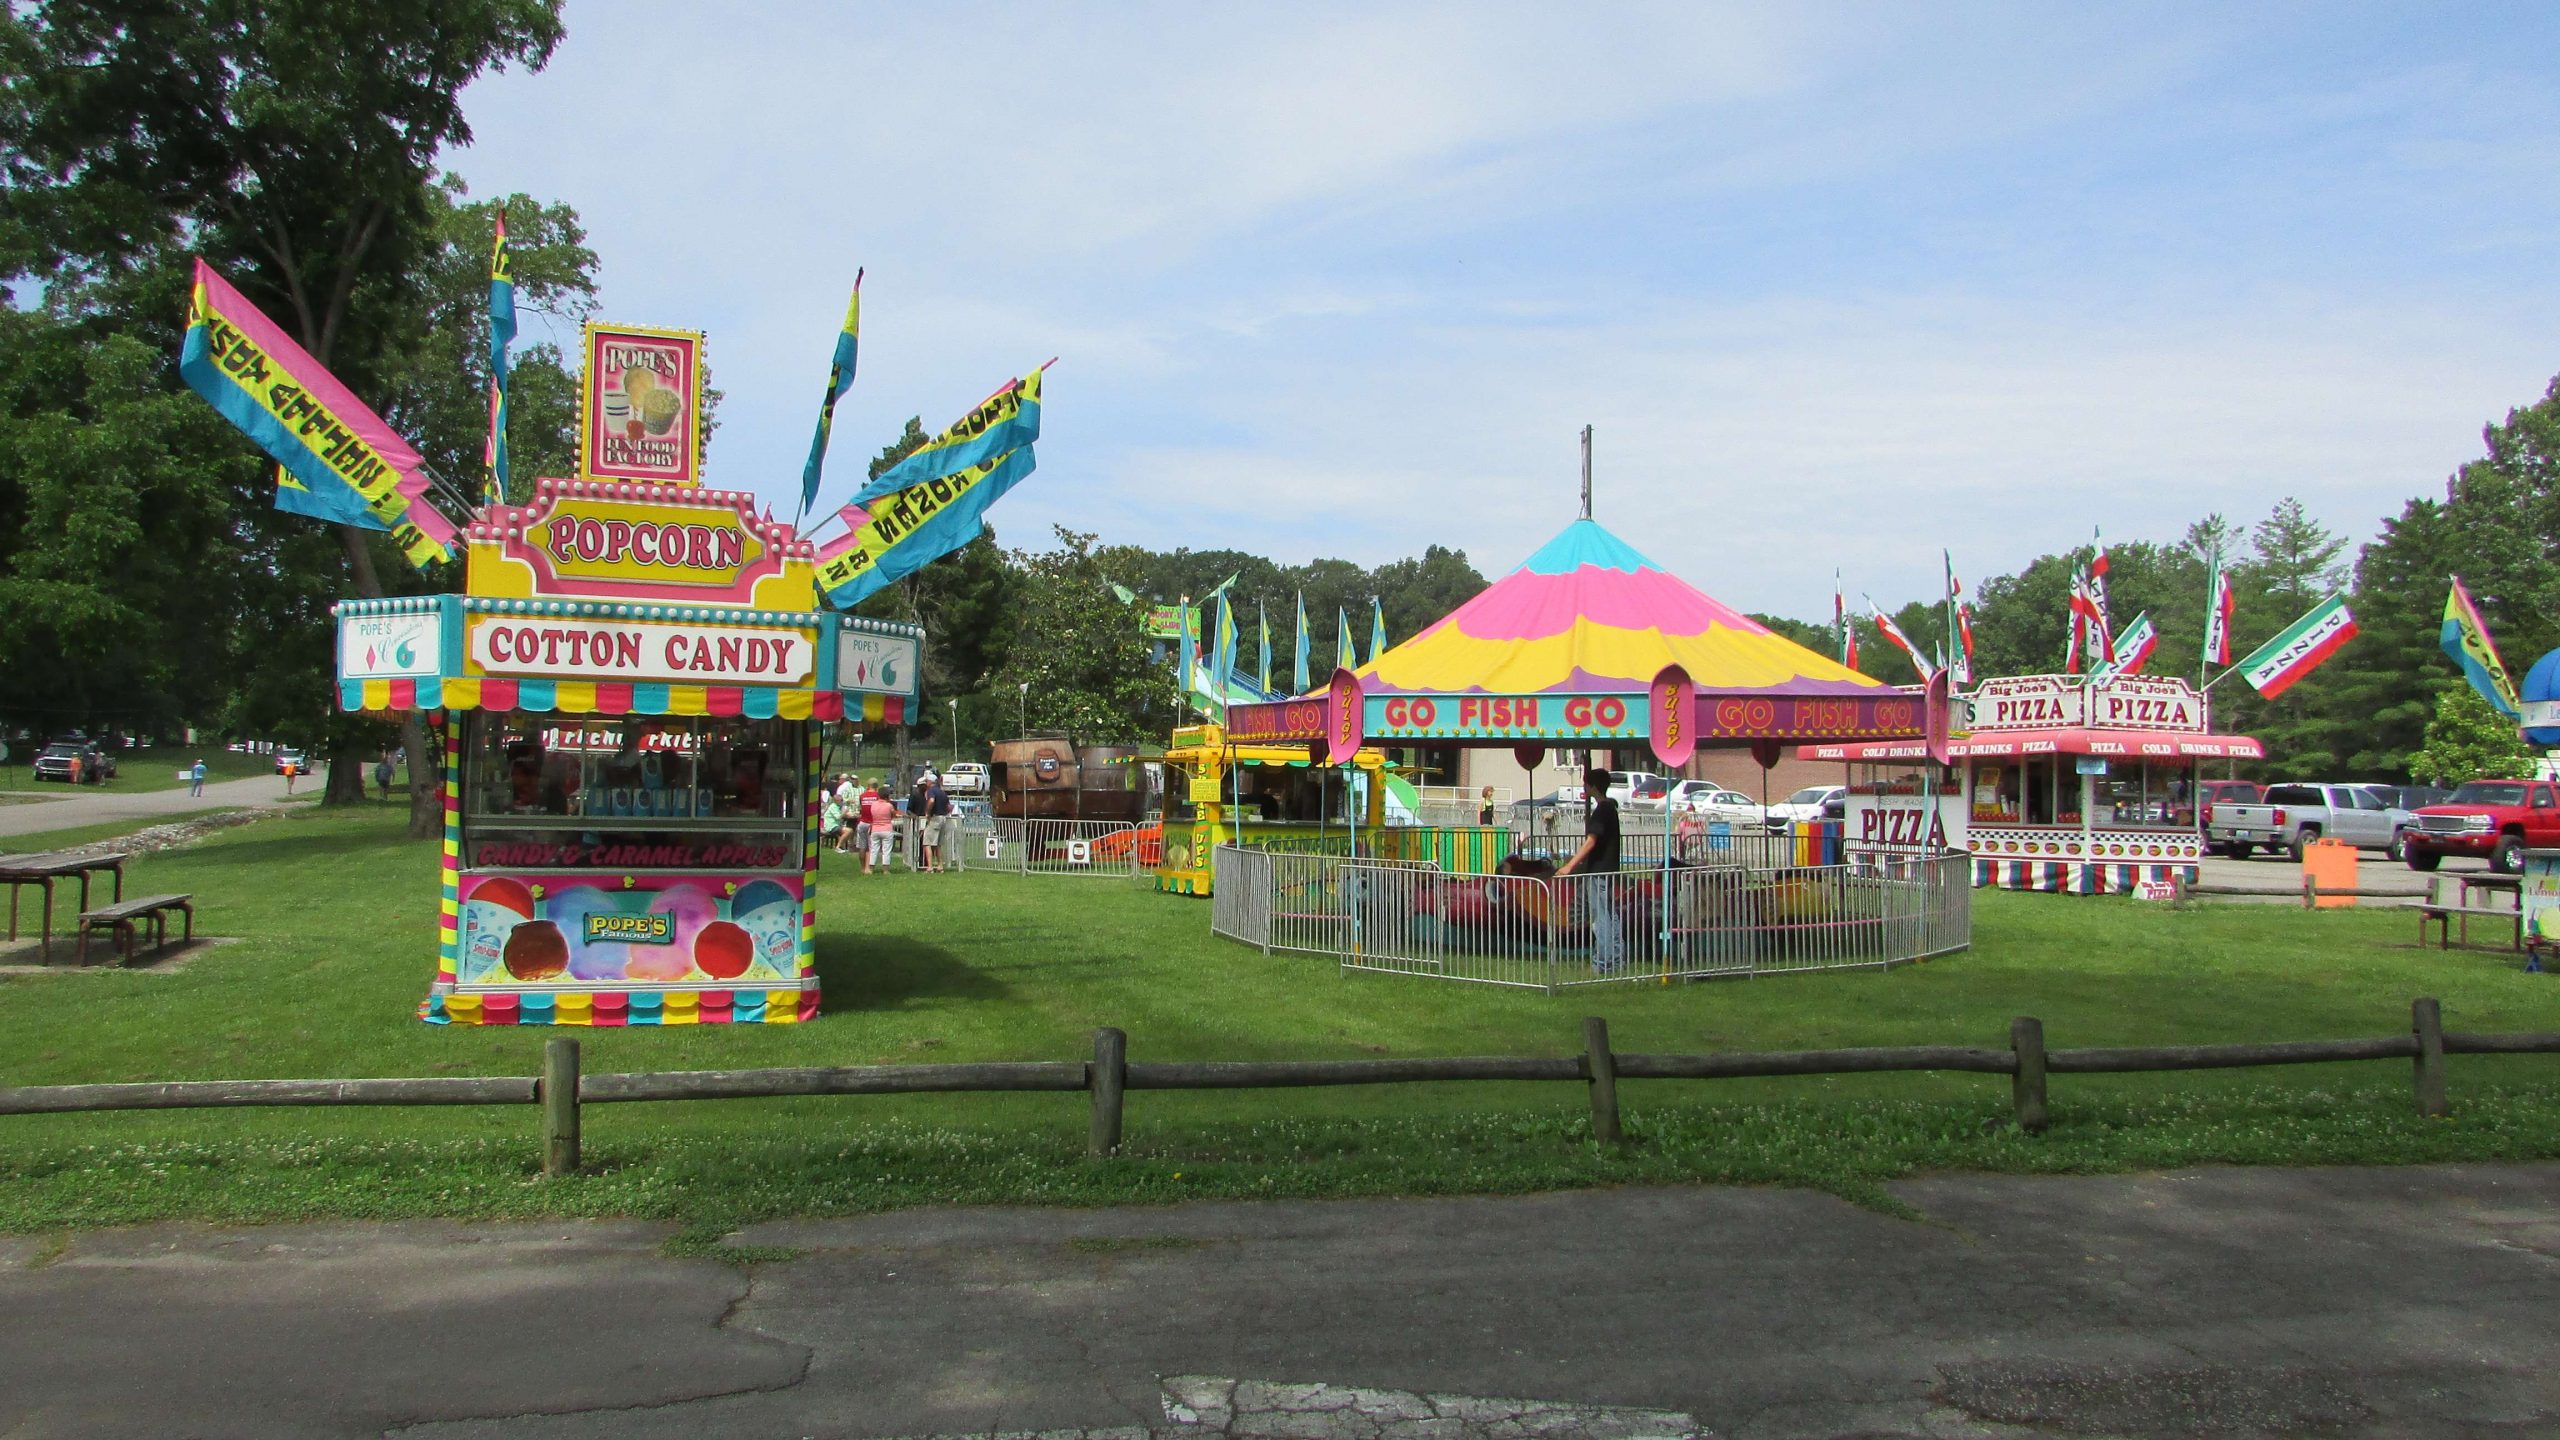 The carnival area had food and rides for the younger fans as well.